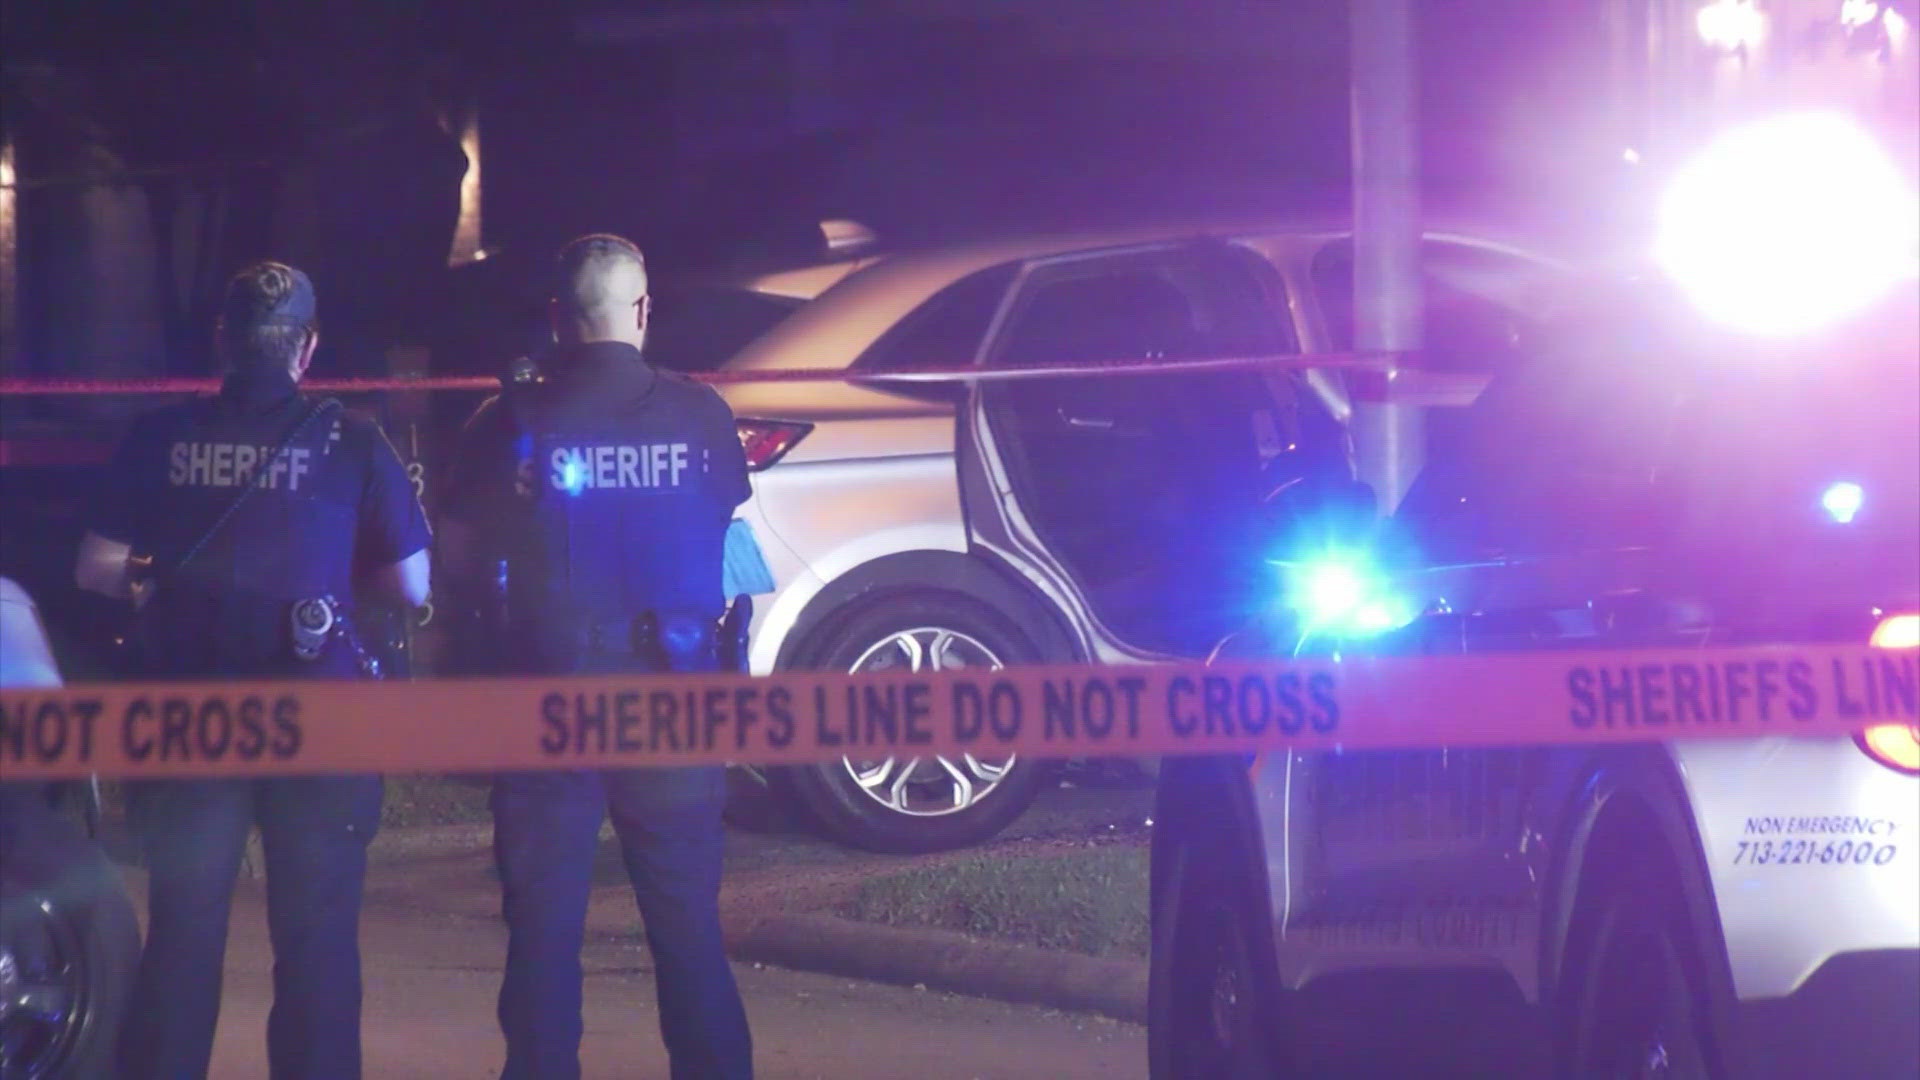 A man was found shot to death inside of a car outside of a home near the Cypress area early Wednesday.